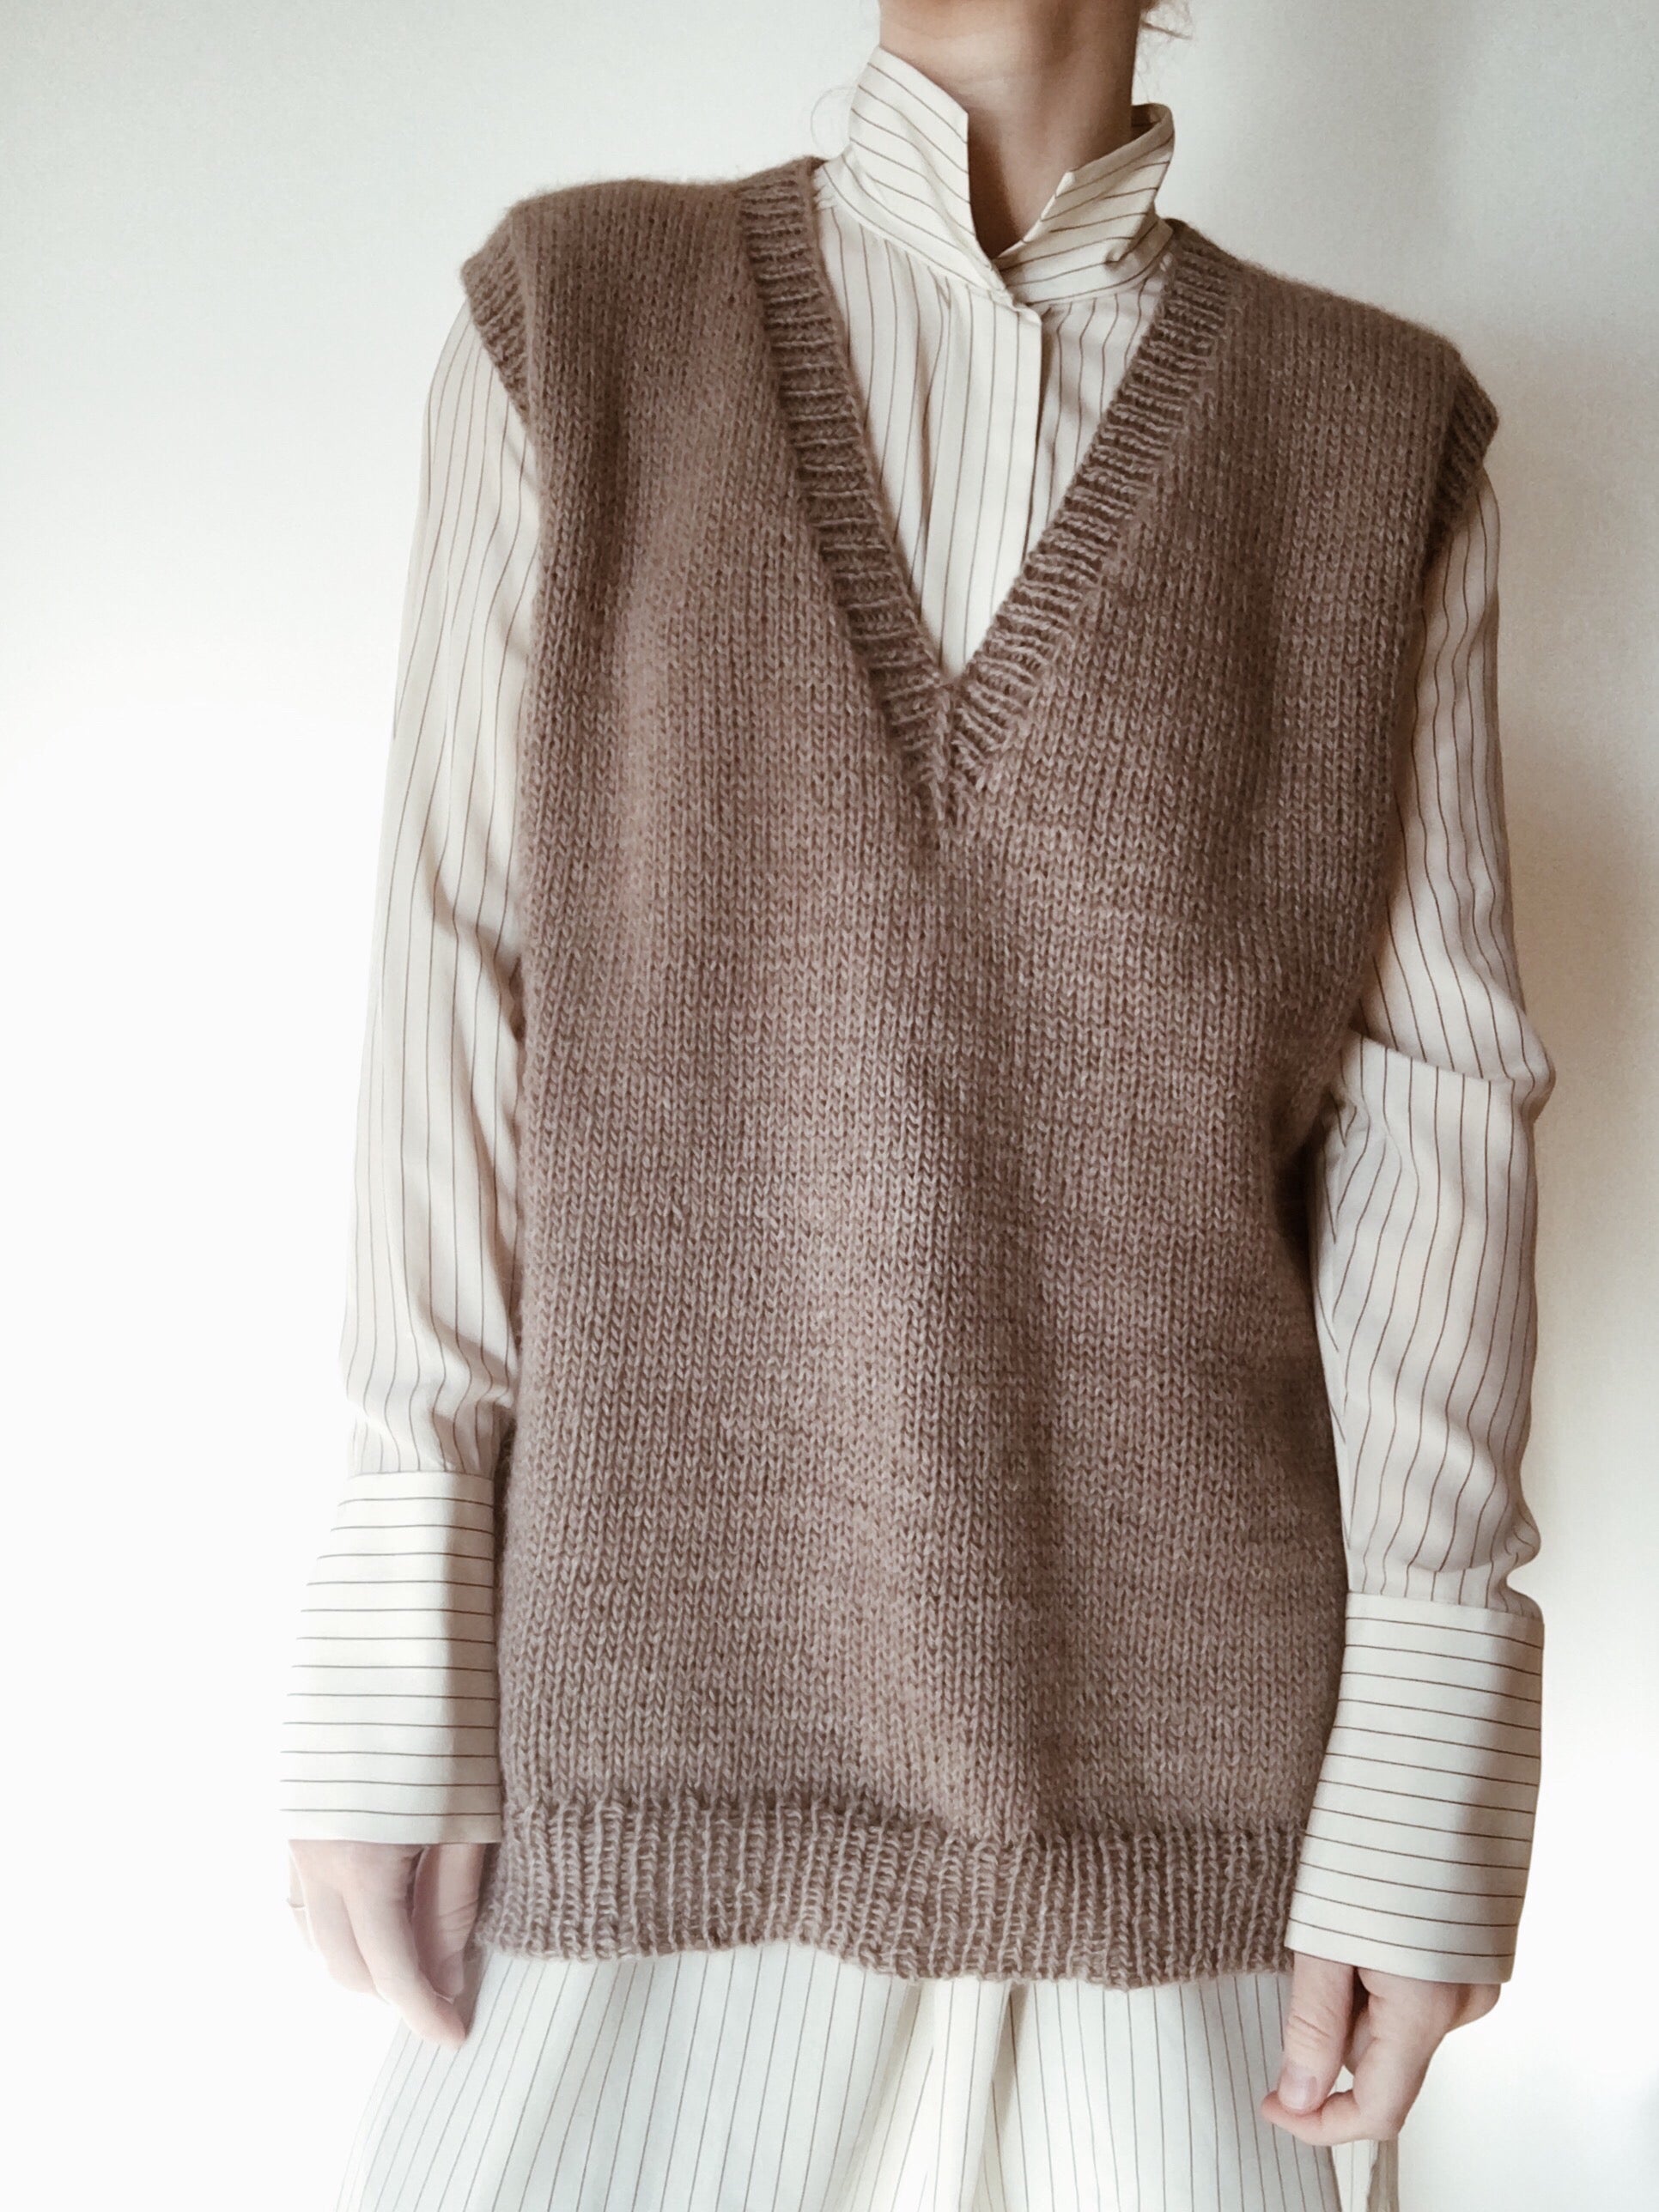 Vest No. 2 - Knitting Pattern in English – • MY FAVOURITE THINGS 